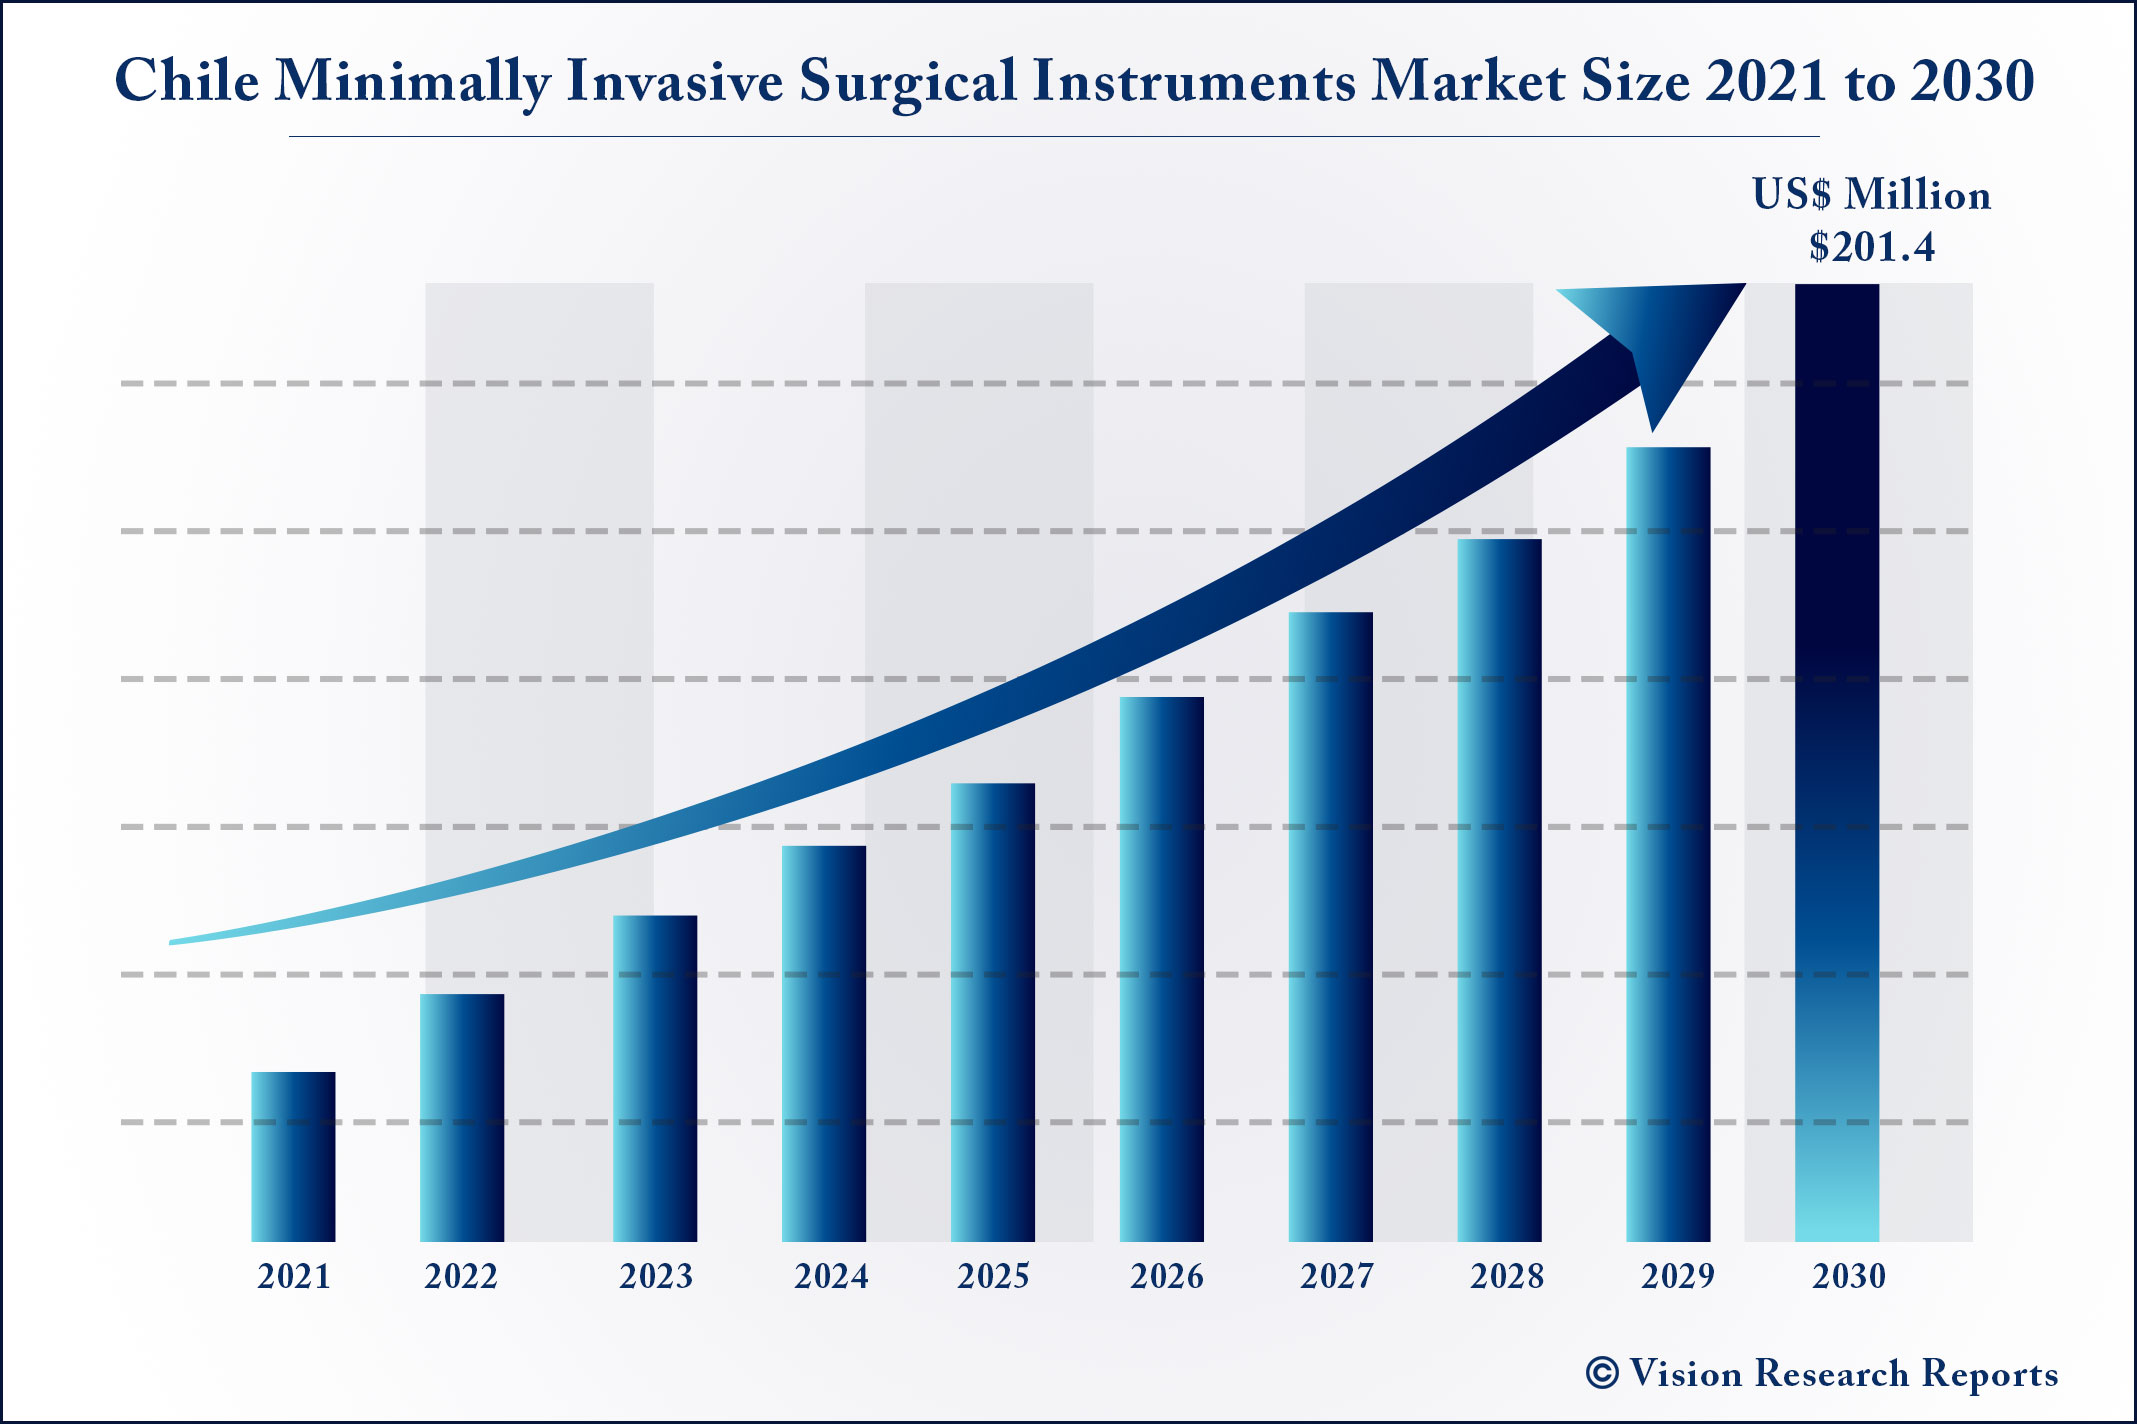 Chile Minimally Invasive Surgical Instruments Market Size 2021 to 2030